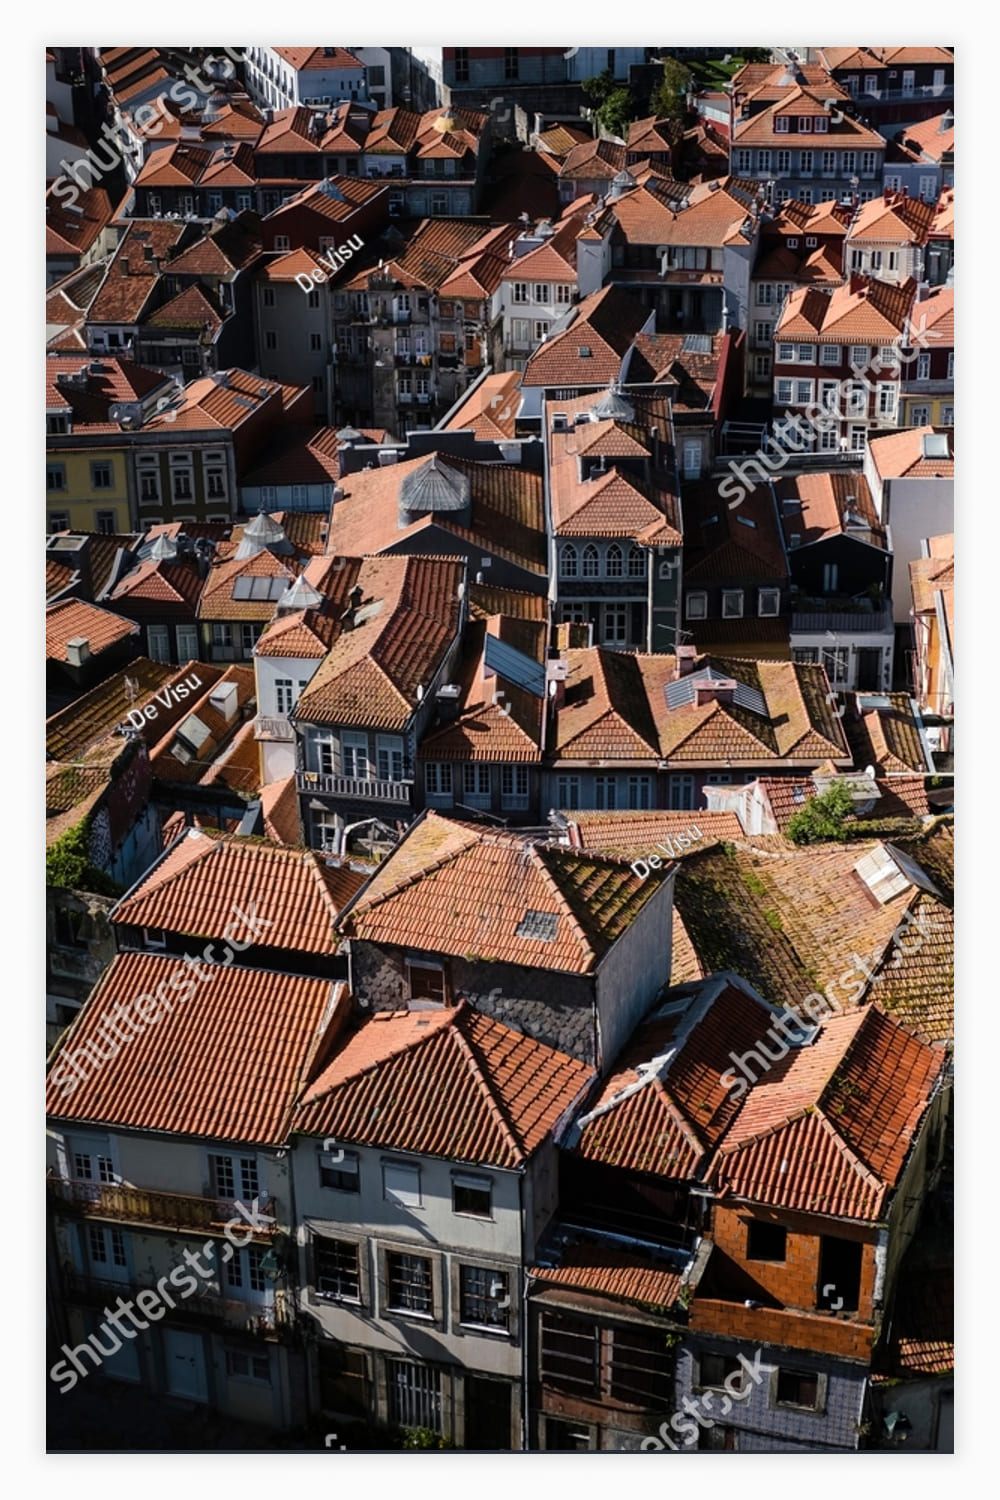 View of the rooftops of the center of Old Porto, Portugal.